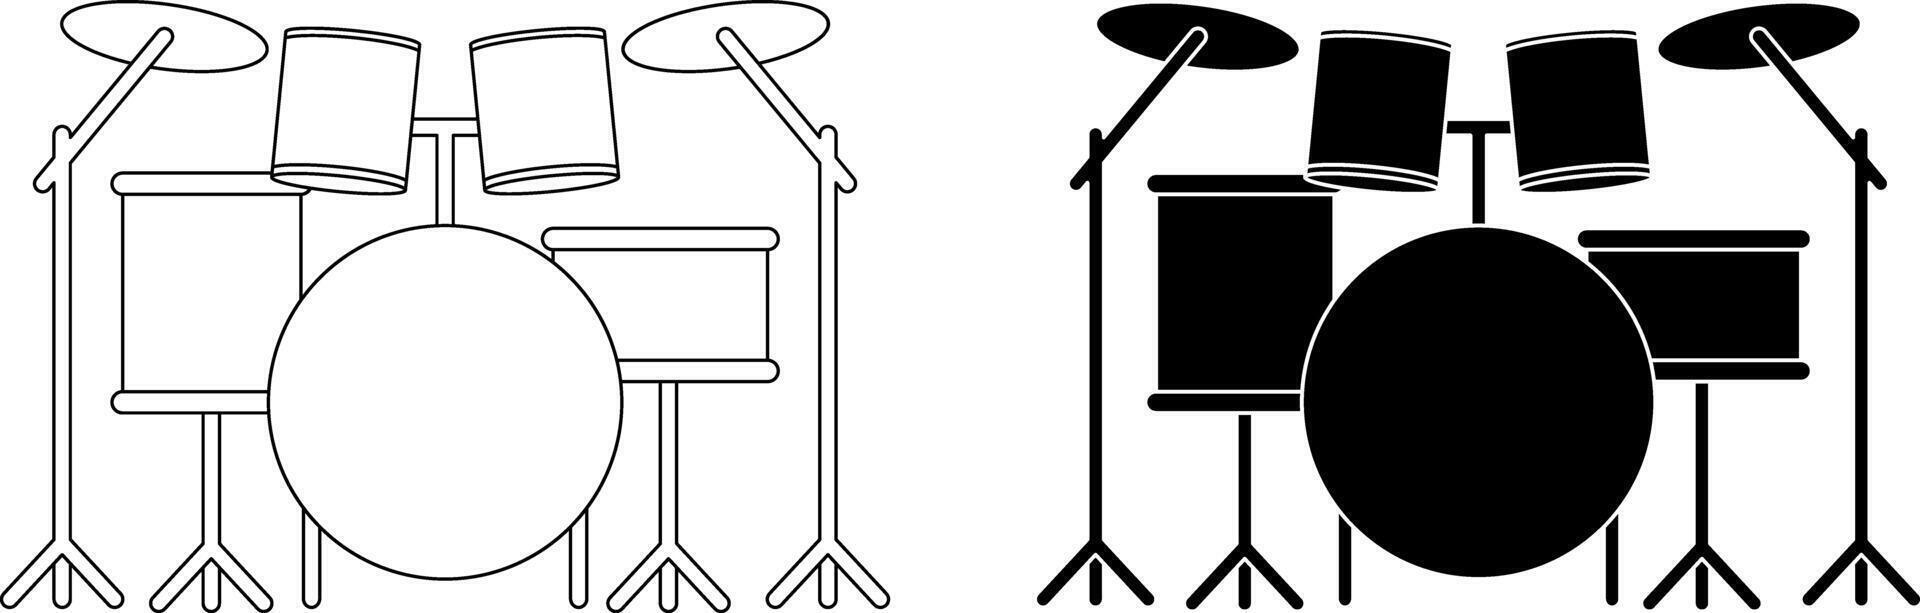 front view musical drum kit icon set vector